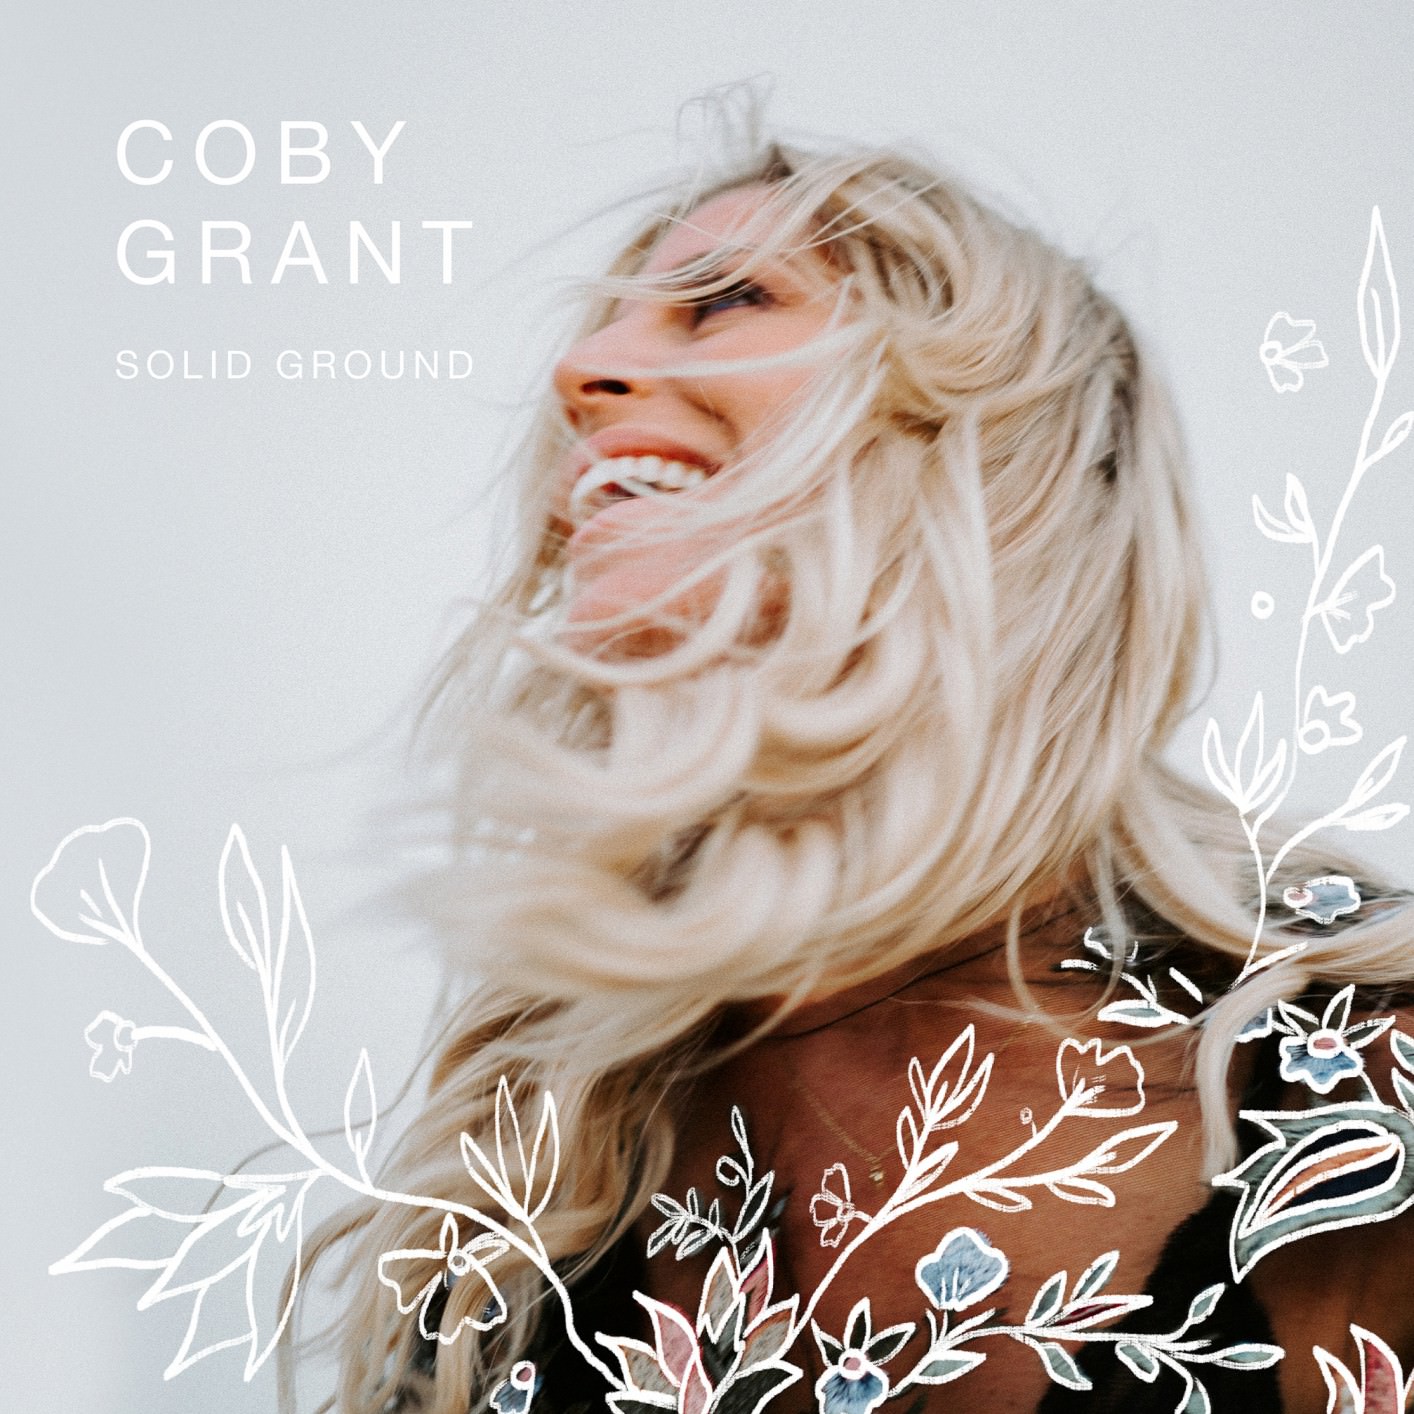 Coby Grant – Solid Ground (2018) [FLAC 24bit/48kHz]